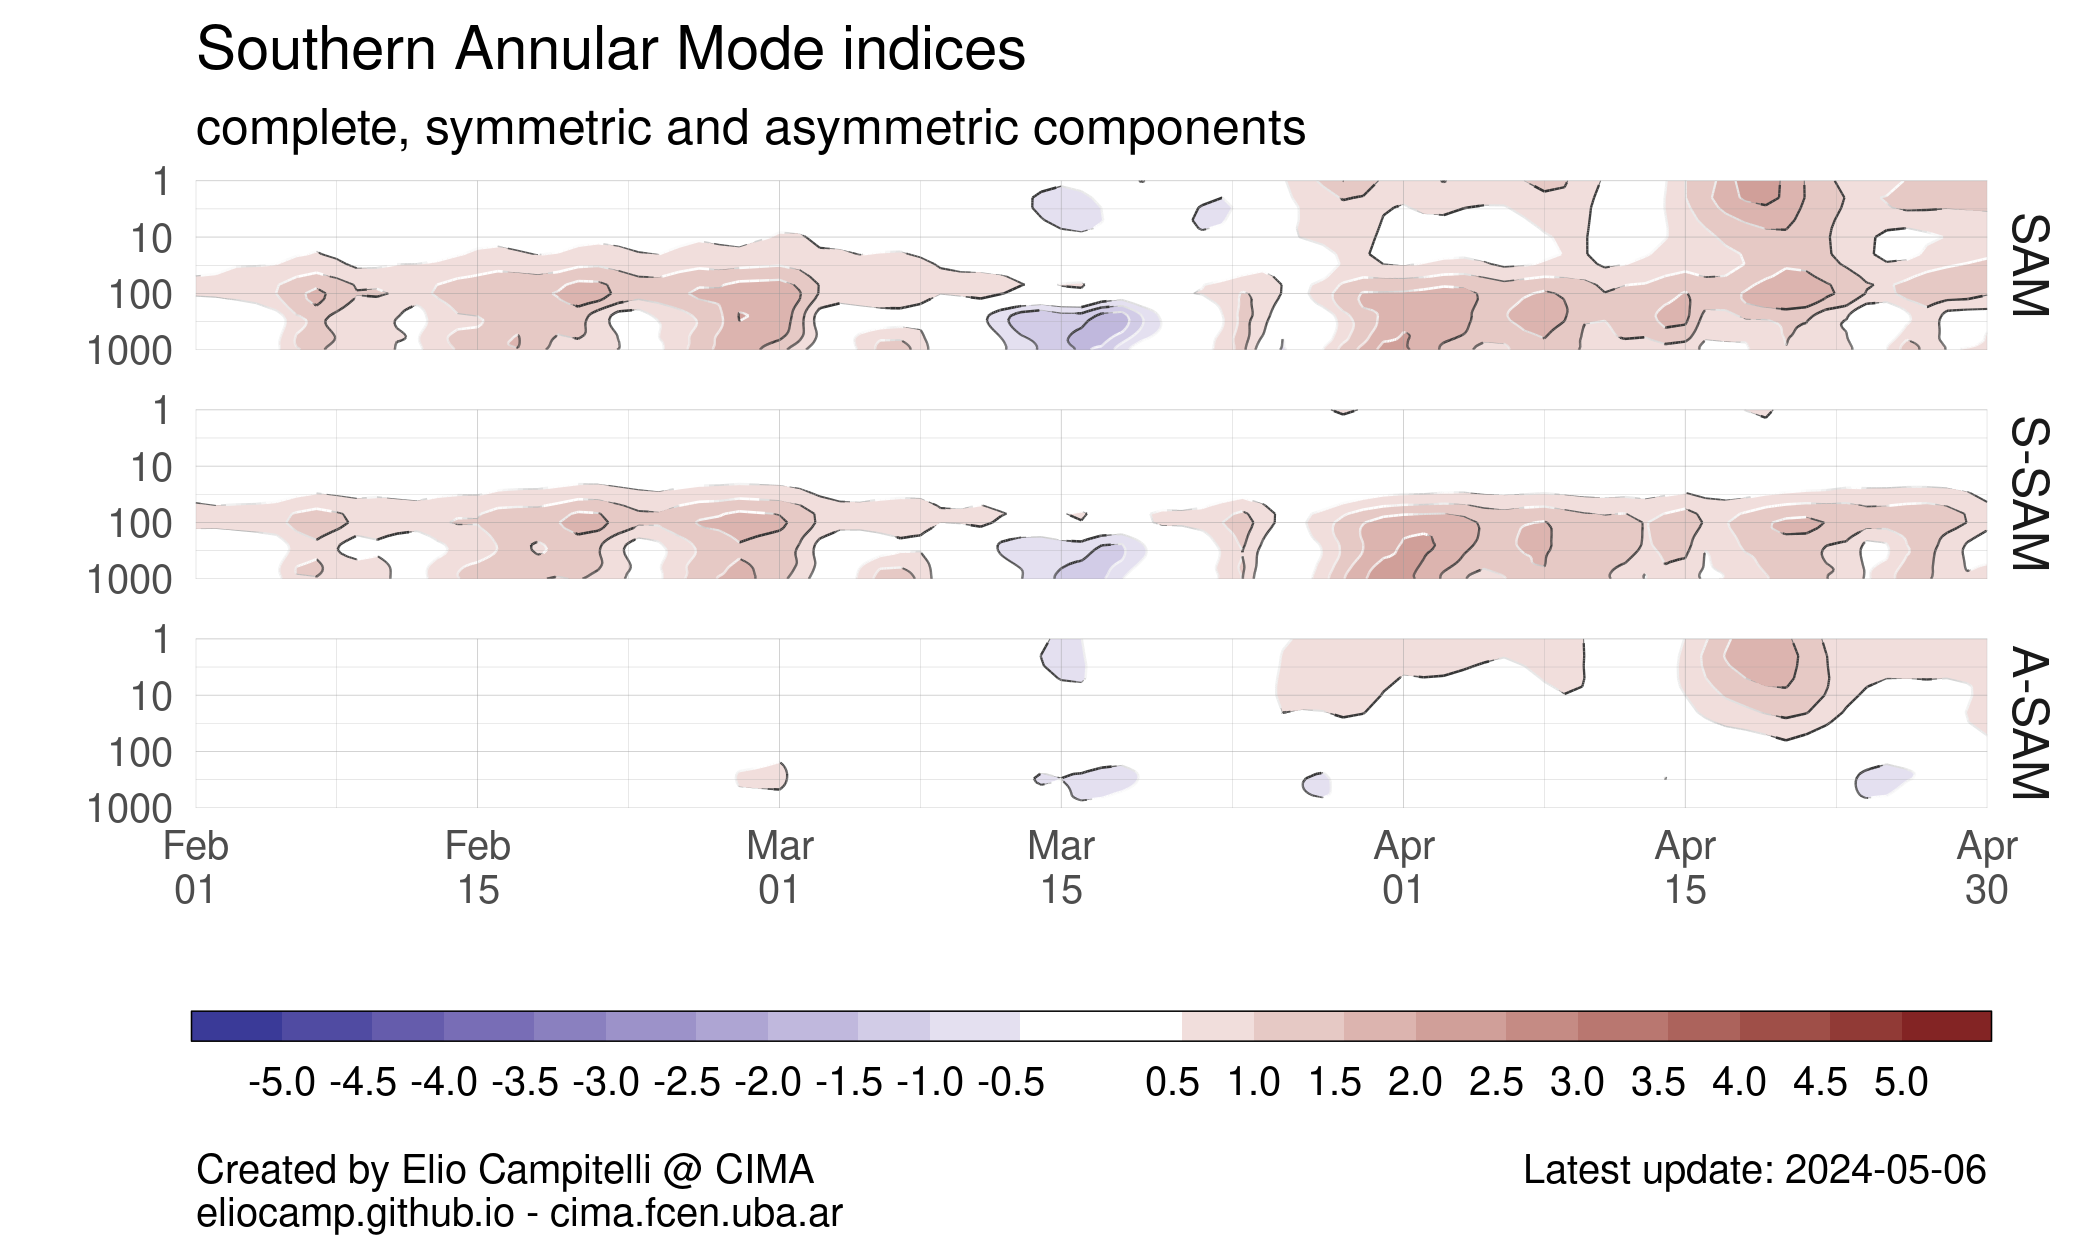 Vertical cross-section of the SAM, S-SAM and A-SAM indices for the last 3 months.